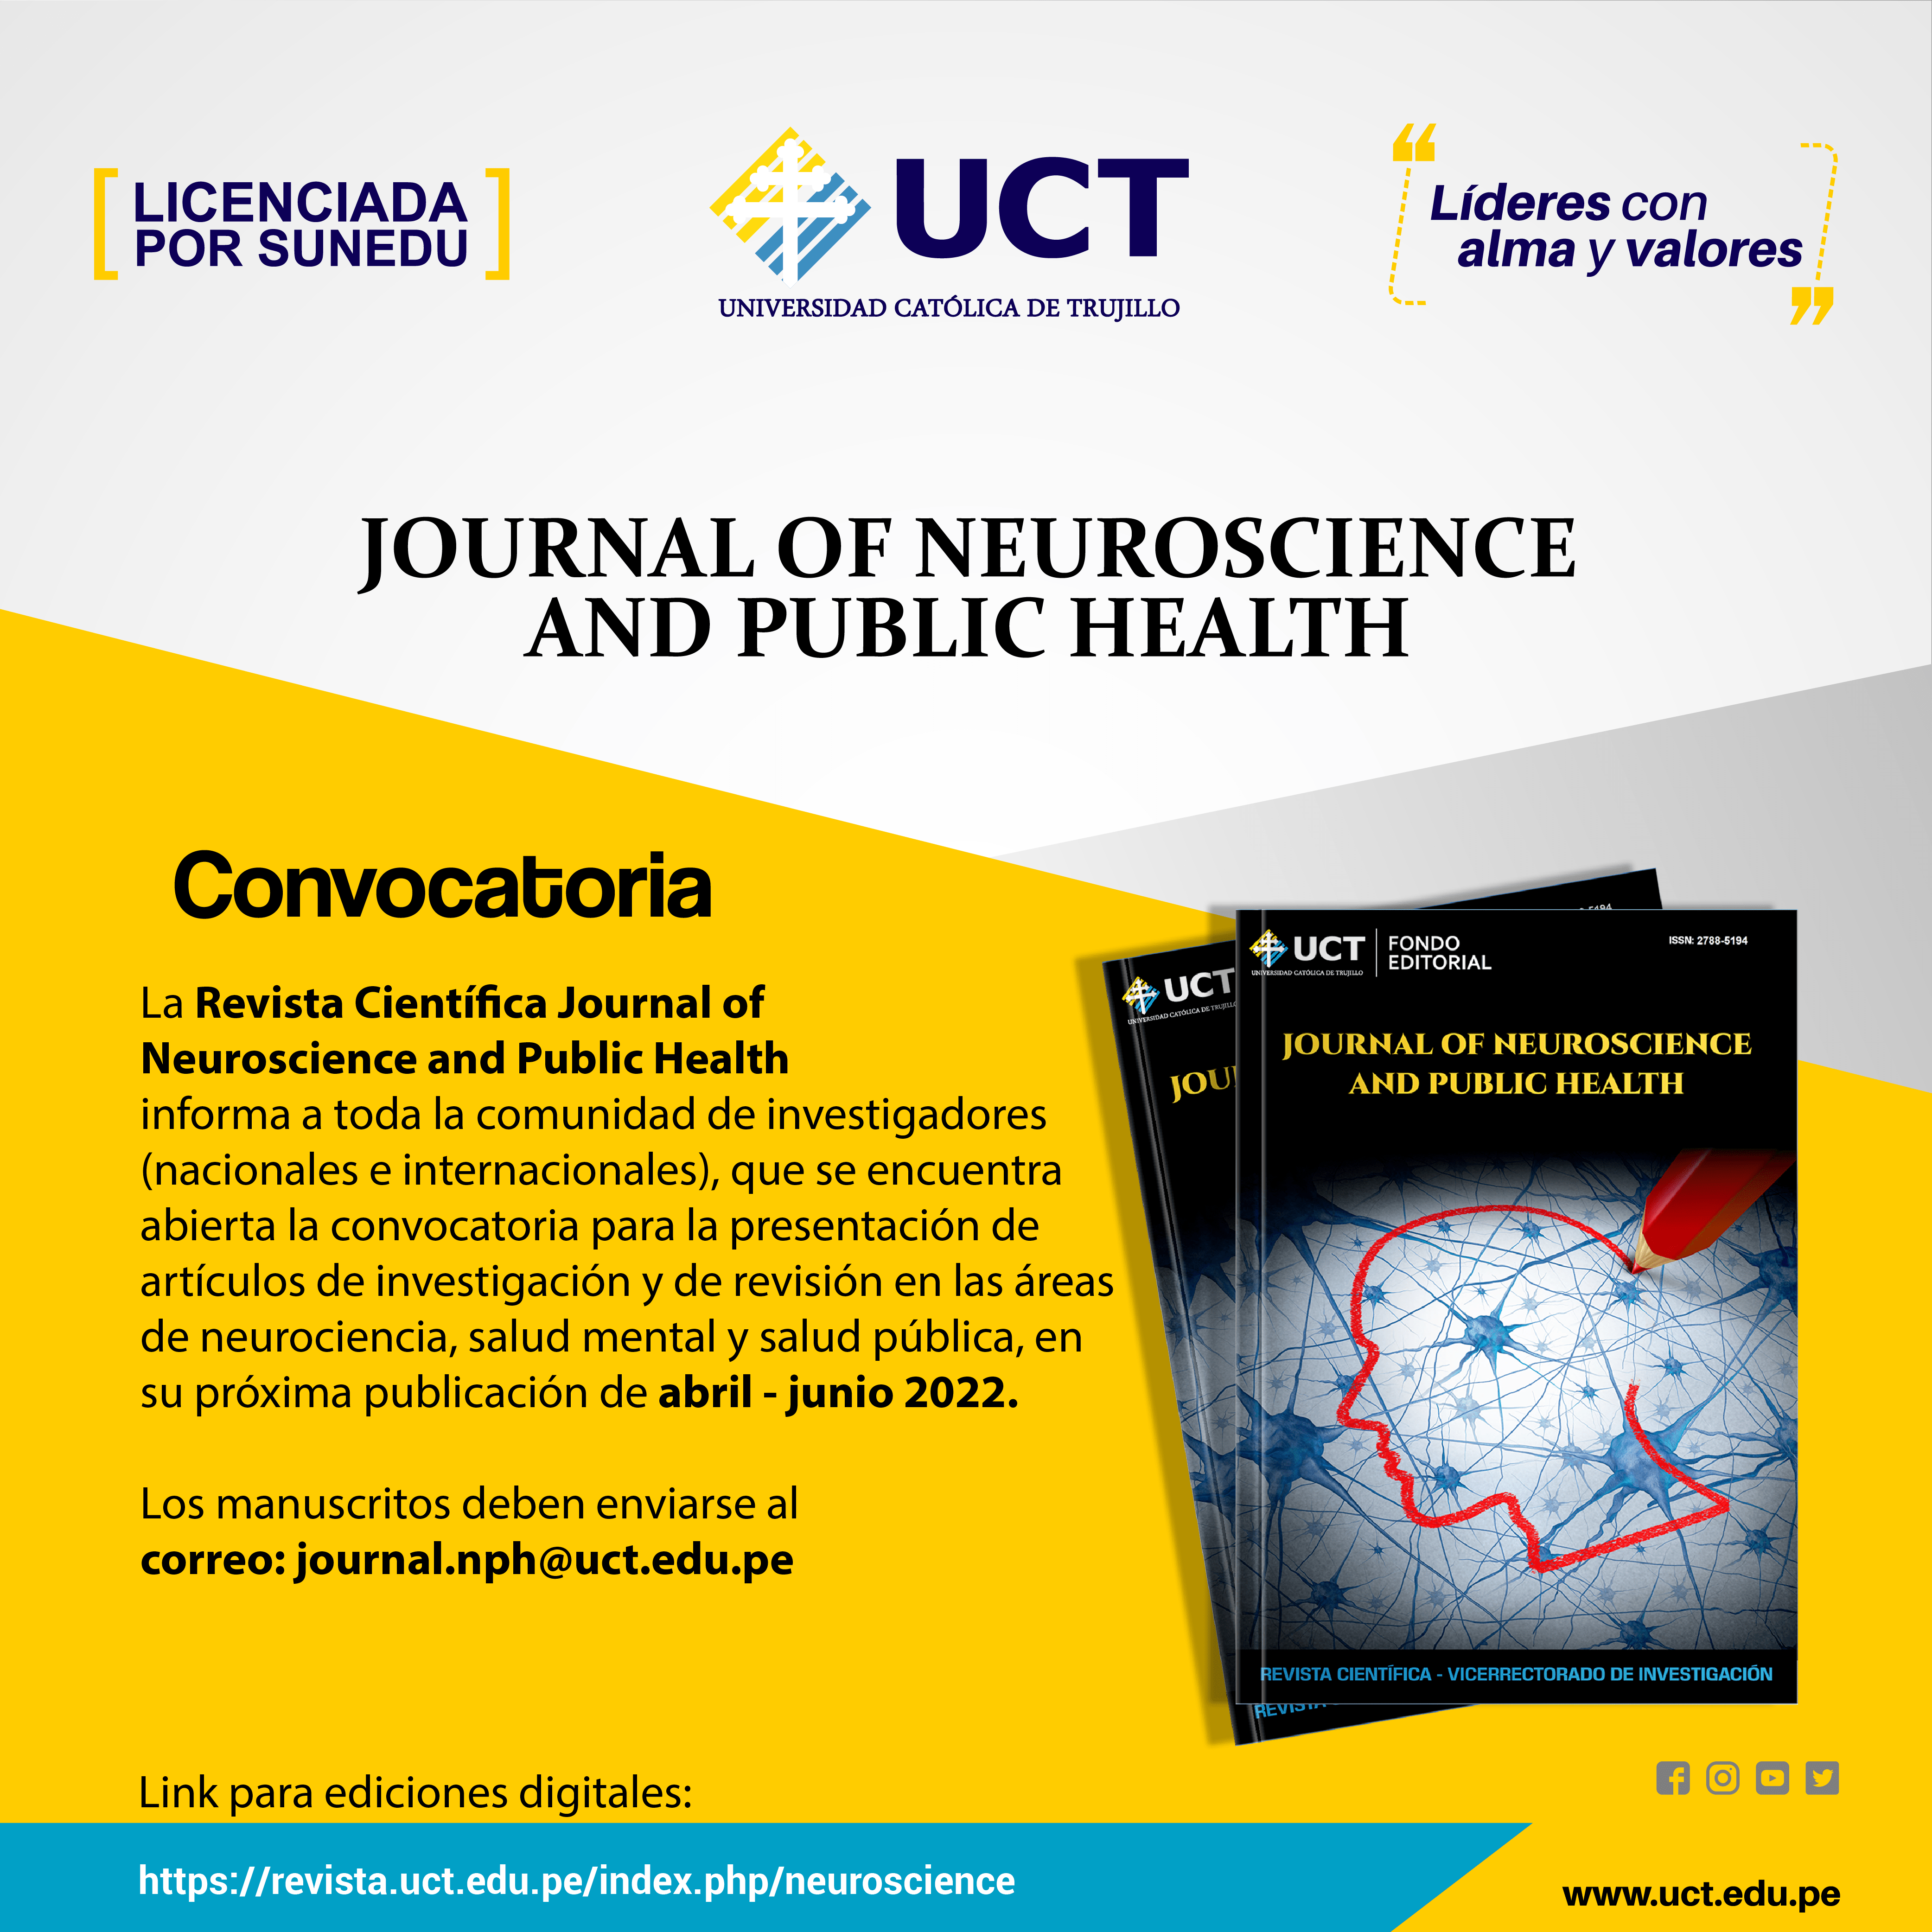 Journal of Neuroscience and Public Health